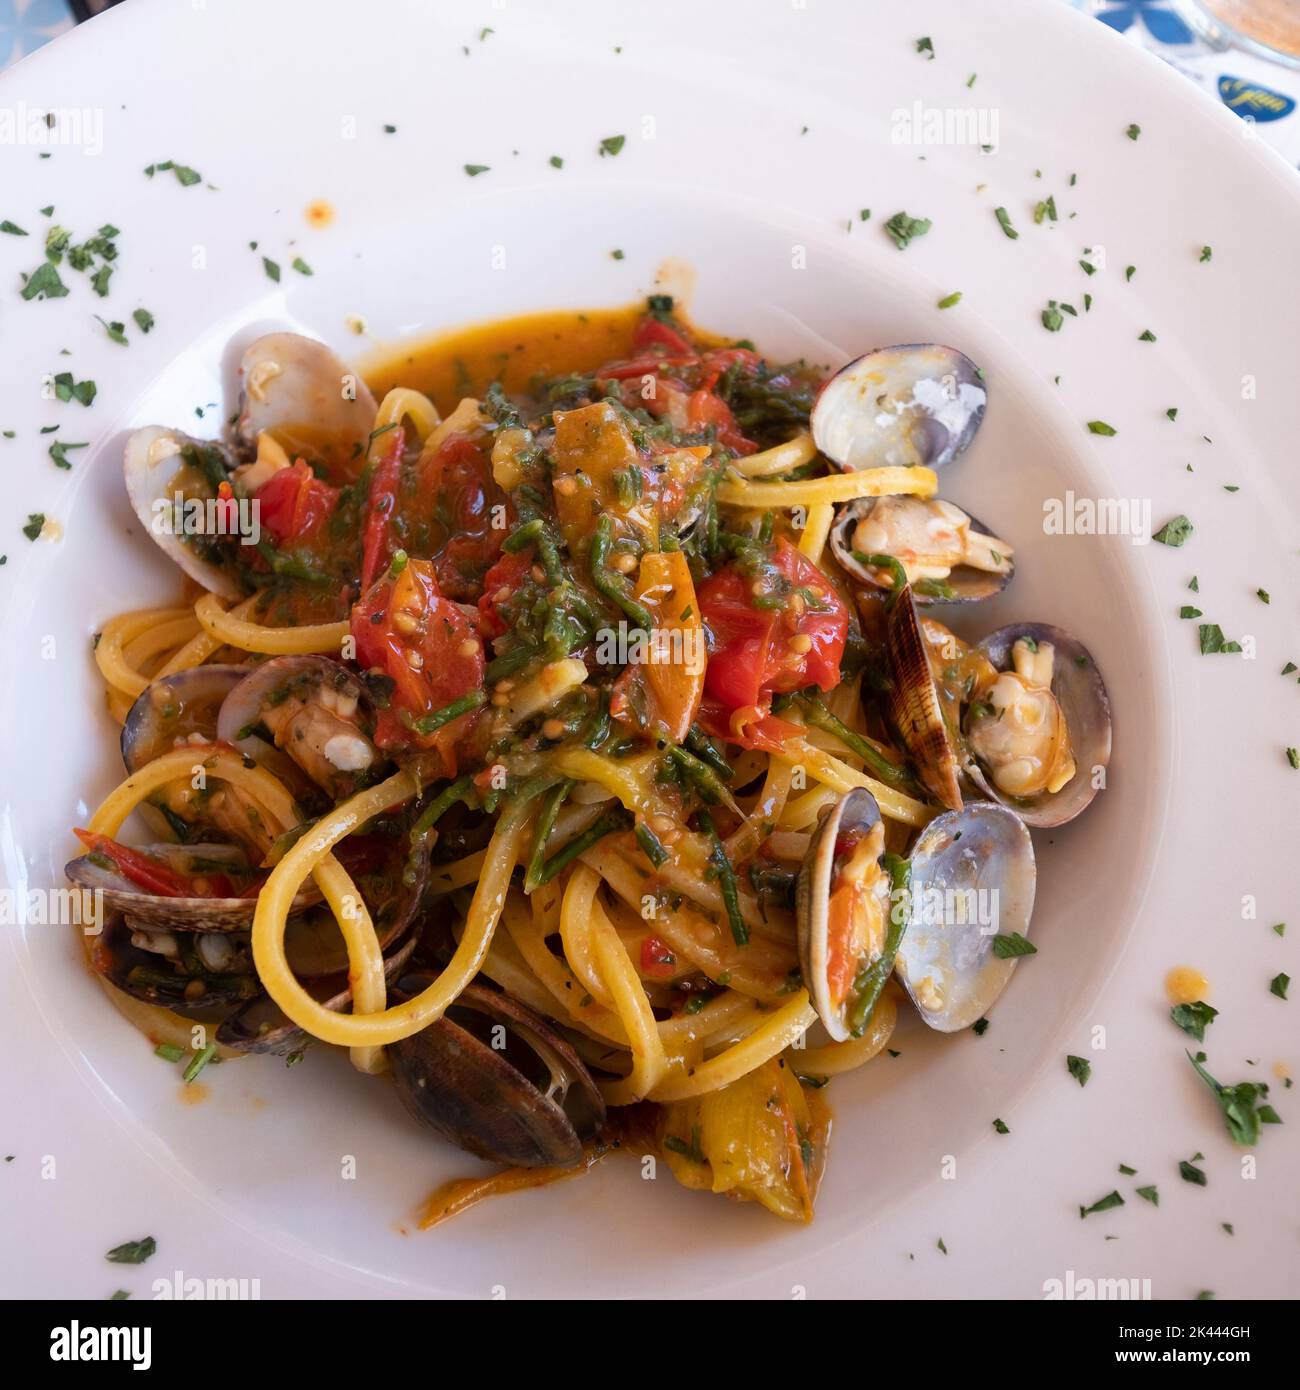 Spaghetti with tomatoes and clams Stock Photo